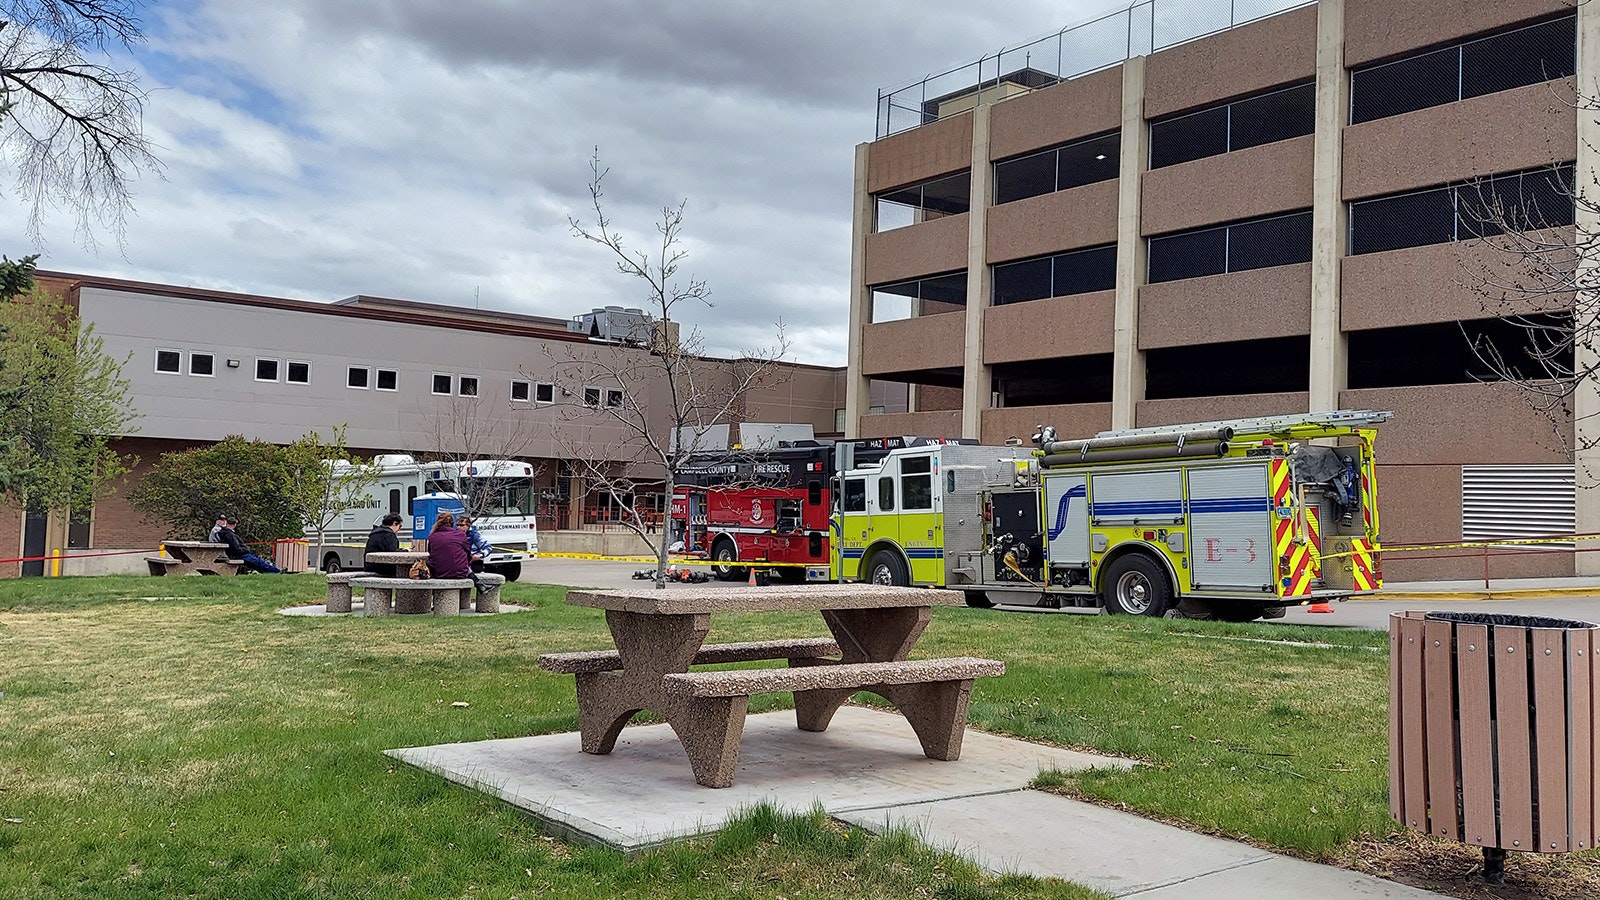 The Campbell County Courthouse was evacuated Tuesday after a report of a hazardous material was received.